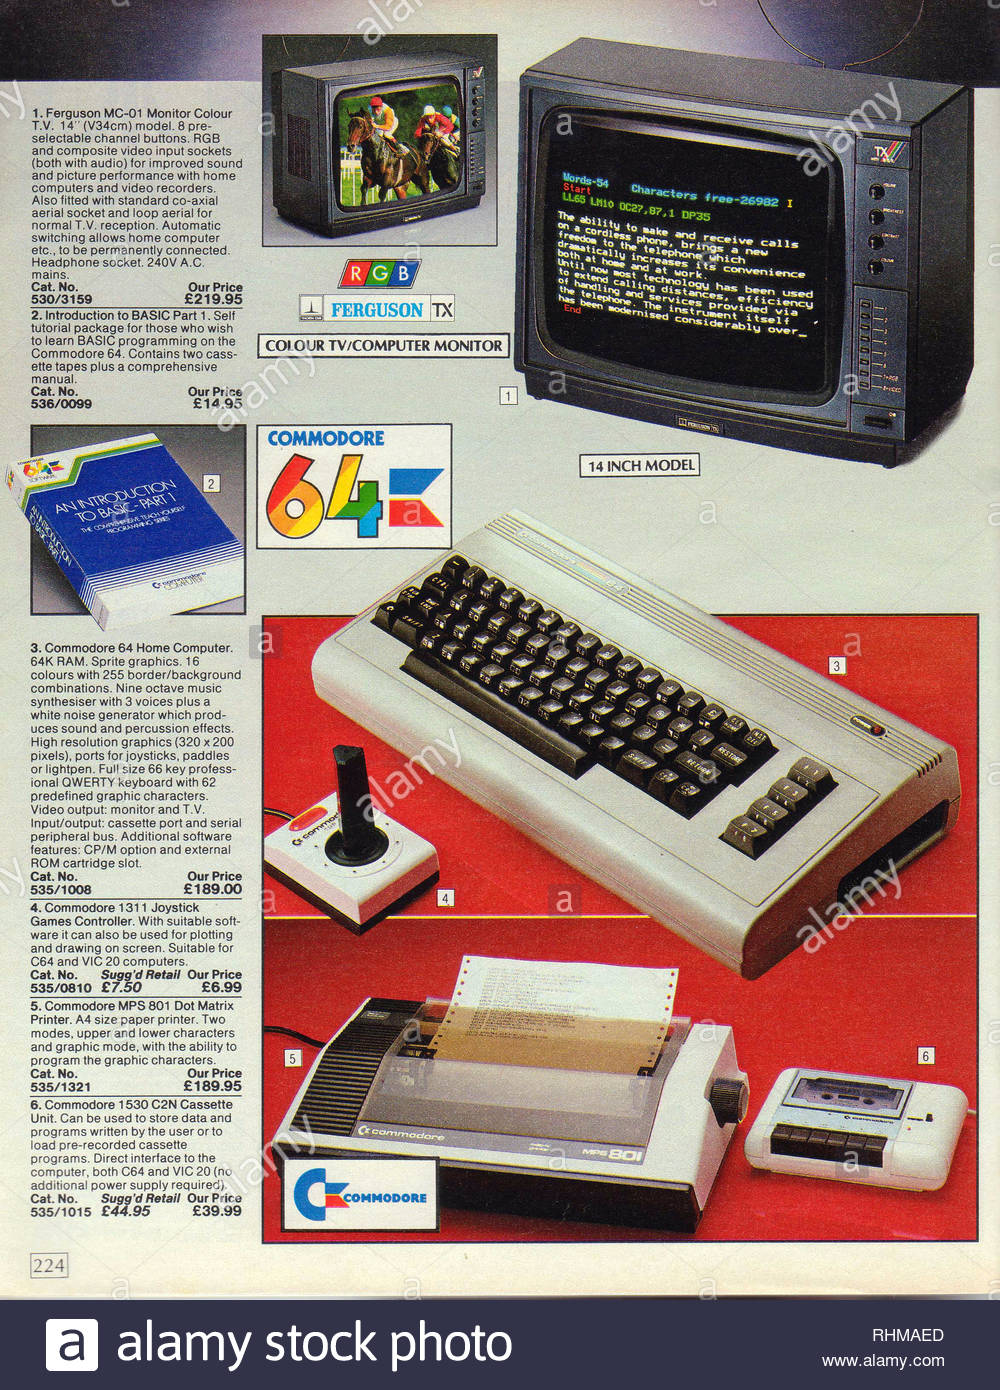 Commodore 64 Home Computer, Argos Catalogue items from 1985 Stock Photo